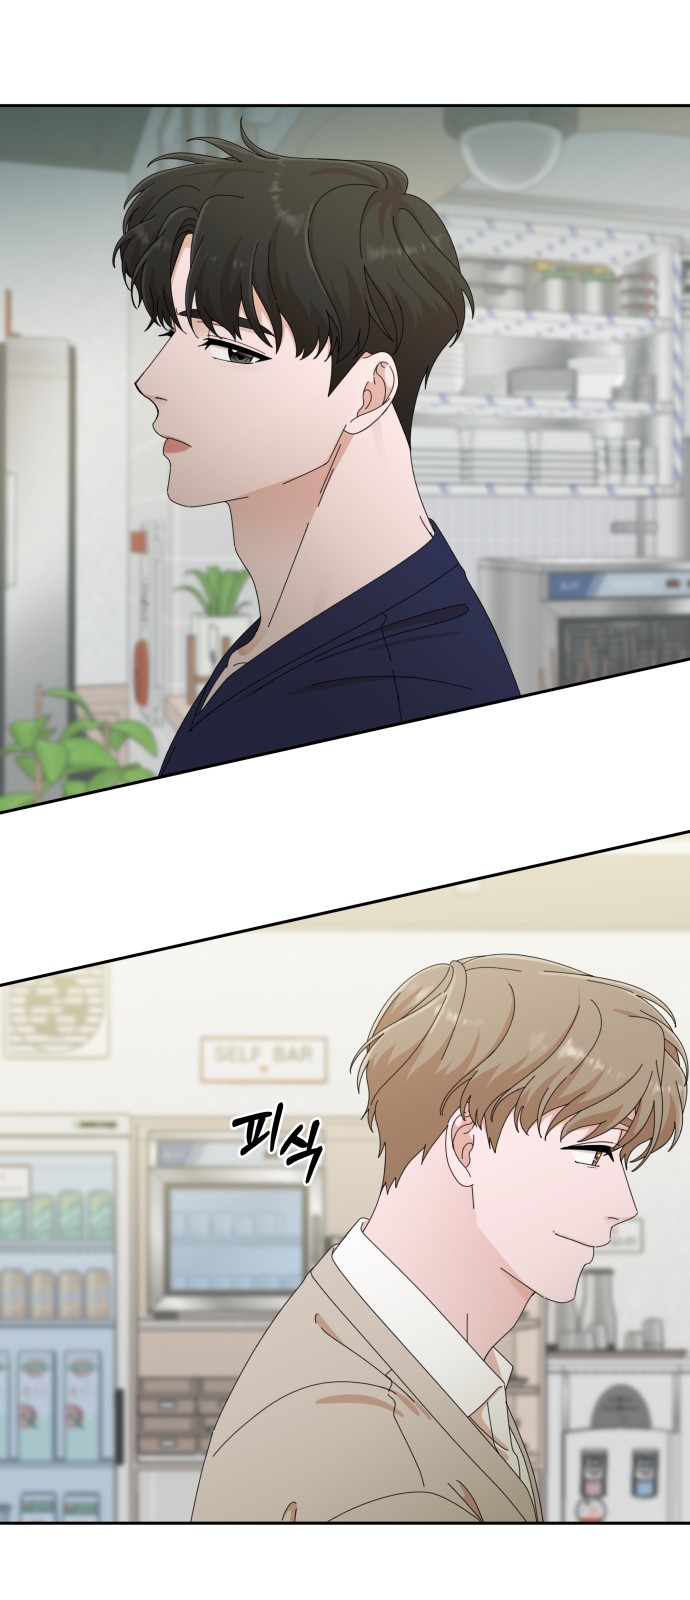 The Man With Pretty Lips - Chapter 42 - Page 54